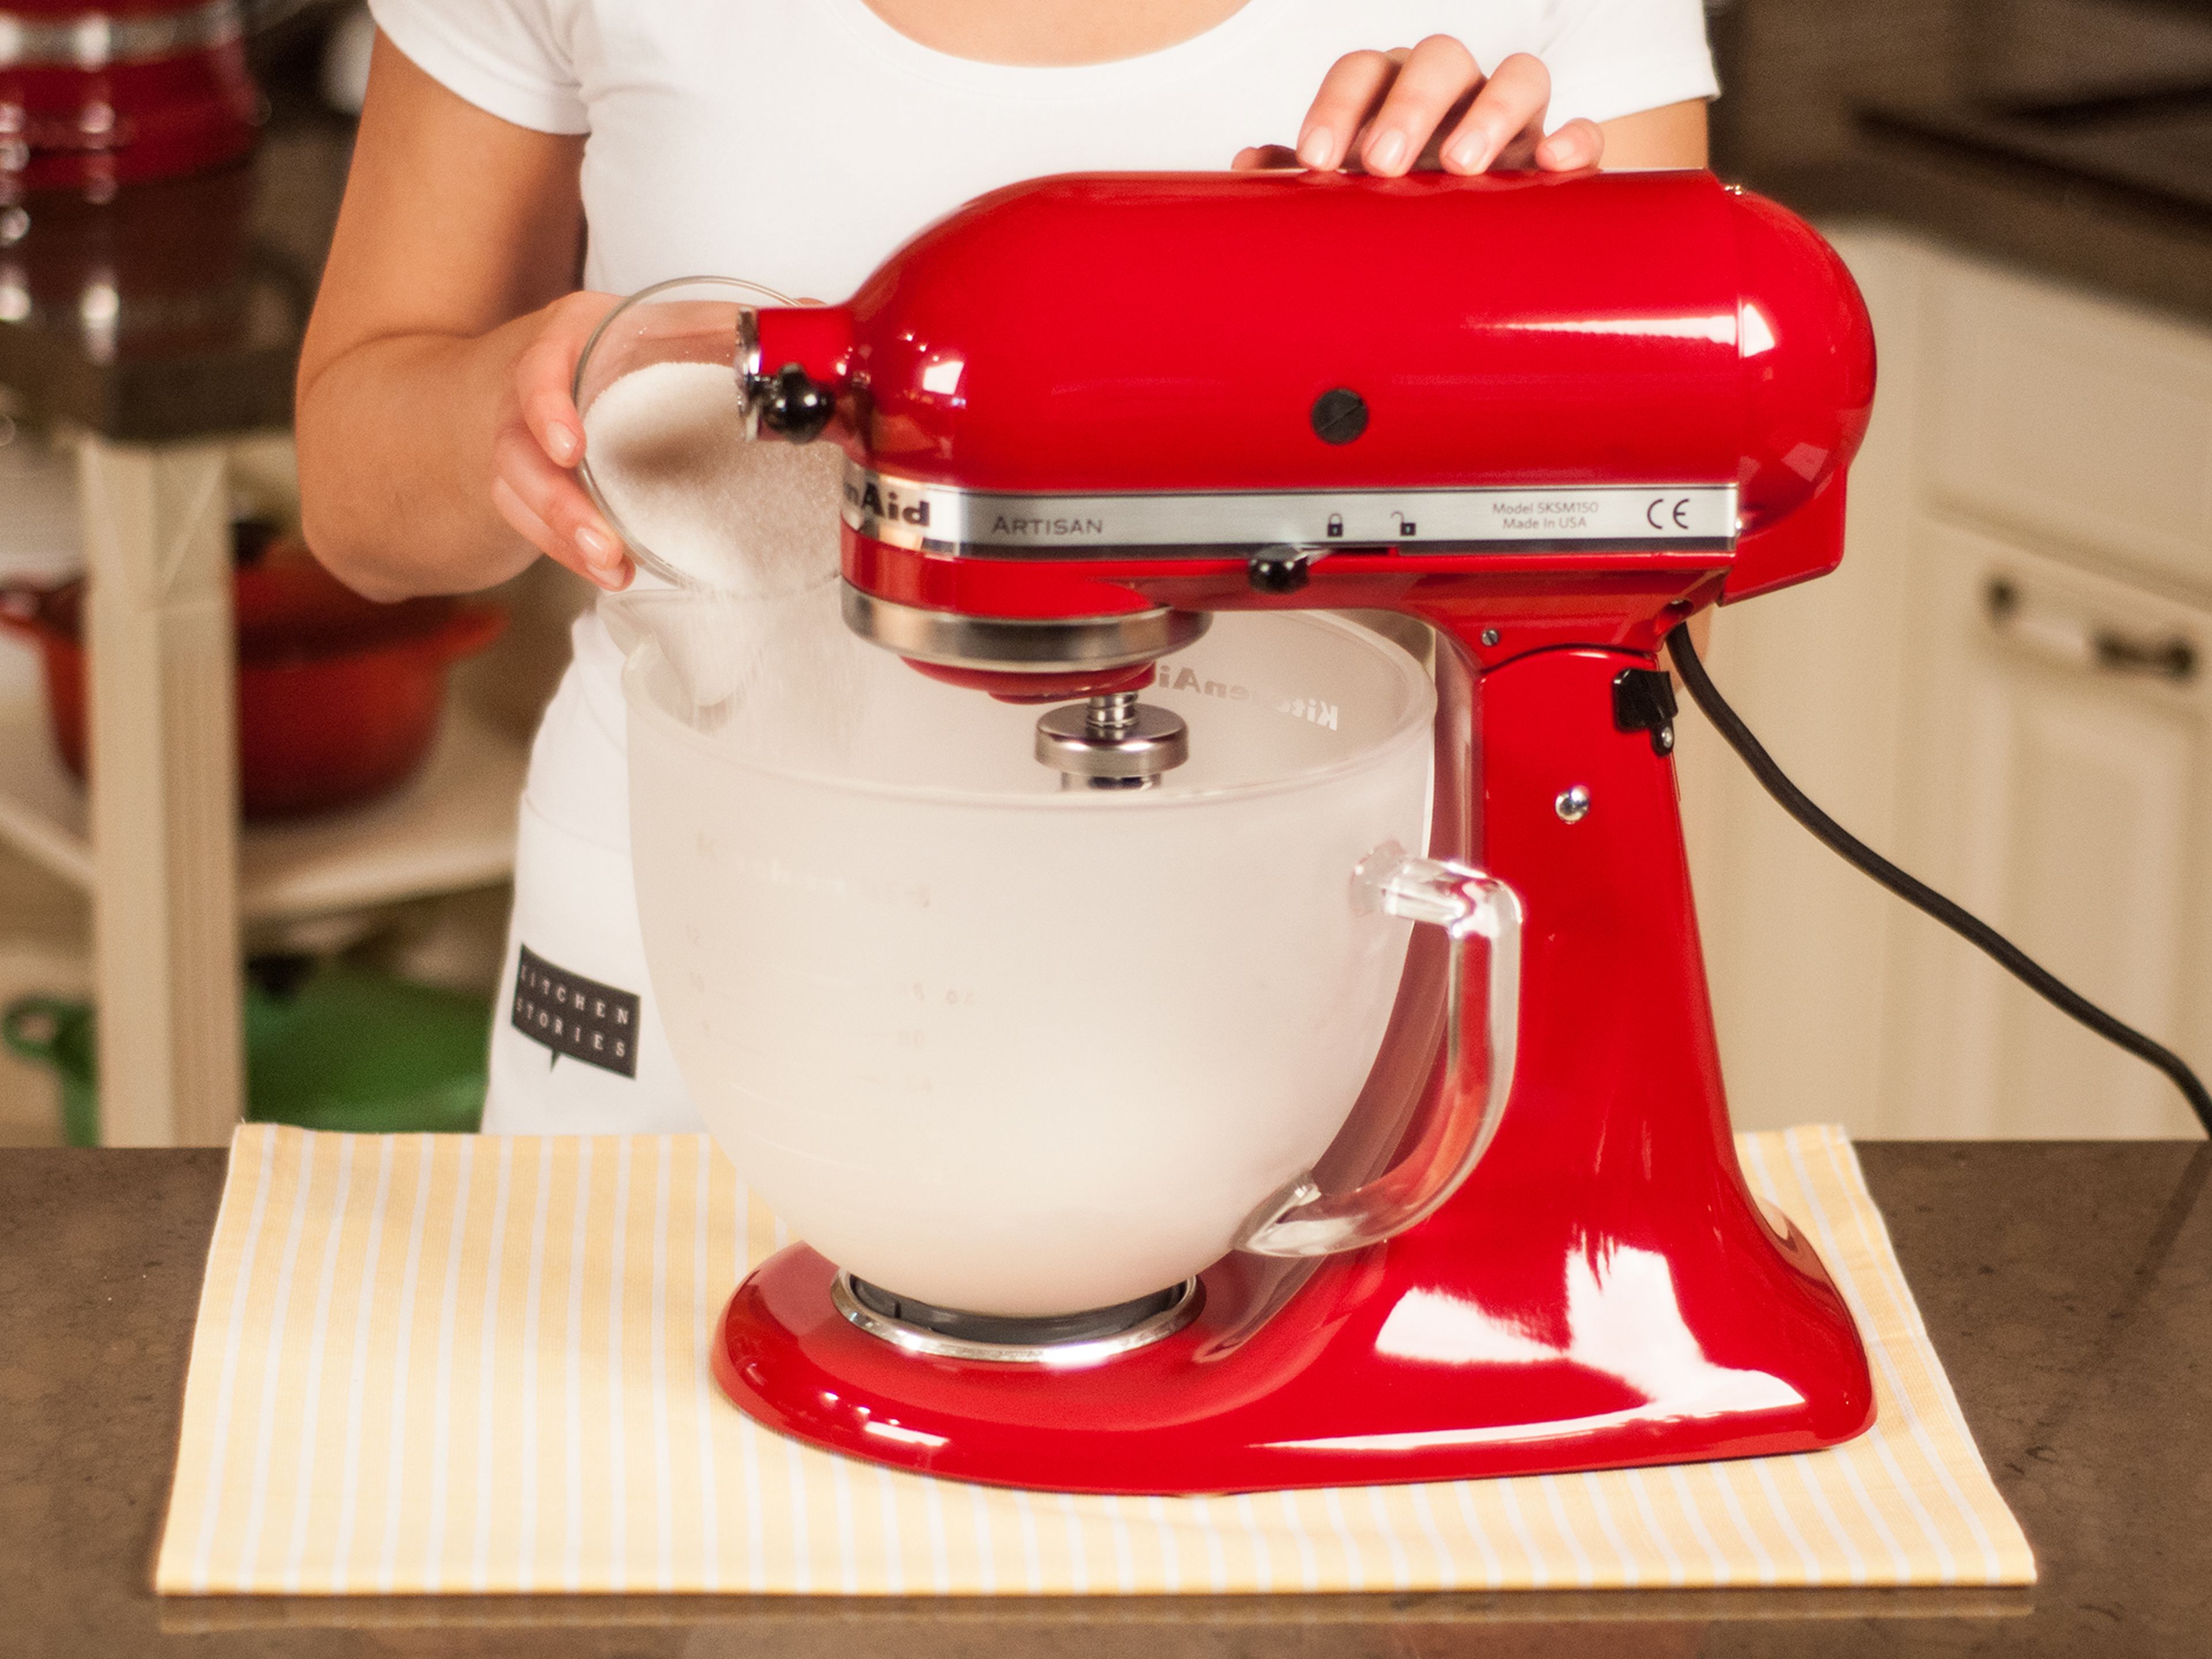 With a standing mixer or a hand mixer beat egg whites until stiff. As soon as they begin to foam, gradually add sugar. The bowl and the beater should be free from any kind of grease to create the desired consistency.